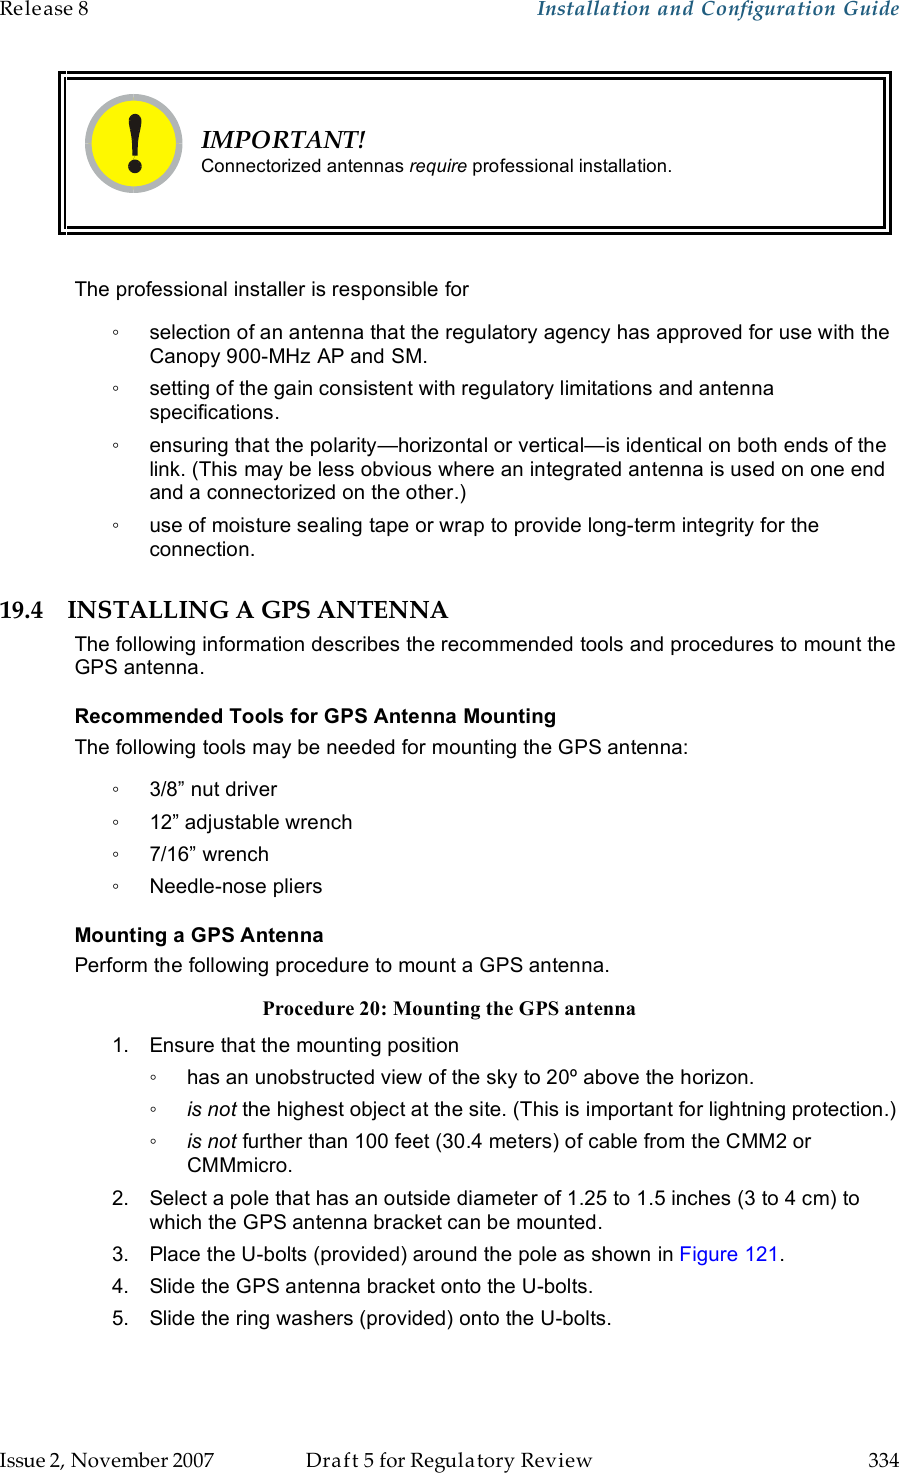 Release 8    Installation and Configuration Guide   Issue 2, November 2007  Draft 5 for Regulatory Review  334      IMPORTANT! Connectorized antennas require professional installation.  The professional installer is responsible for ◦  selection of an antenna that the regulatory agency has approved for use with the Canopy 900-MHz AP and SM. ◦  setting of the gain consistent with regulatory limitations and antenna specifications. ◦  ensuring that the polarity—horizontal or vertical—is identical on both ends of the link. (This may be less obvious where an integrated antenna is used on one end and a connectorized on the other.) ◦  use of moisture sealing tape or wrap to provide long-term integrity for the connection. 19.4 INSTALLING A GPS ANTENNA The following information describes the recommended tools and procedures to mount the GPS antenna. Recommended Tools for GPS Antenna Mounting The following tools may be needed for mounting the GPS antenna: ◦  3/8” nut driver ◦  12” adjustable wrench ◦  7/16” wrench ◦  Needle-nose pliers Mounting a GPS Antenna Perform the following procedure to mount a GPS antenna. Procedure 20: Mounting the GPS antenna 1.  Ensure that the mounting position ◦  has an unobstructed view of the sky to 20º above the horizon. ◦ is not the highest object at the site. (This is important for lightning protection.) ◦ is not further than 100 feet (30.4 meters) of cable from the CMM2 or CMMmicro. 2.  Select a pole that has an outside diameter of 1.25 to 1.5 inches (3 to 4 cm) to which the GPS antenna bracket can be mounted. 3.  Place the U-bolts (provided) around the pole as shown in Figure 121. 4.  Slide the GPS antenna bracket onto the U-bolts. 5.  Slide the ring washers (provided) onto the U-bolts. 